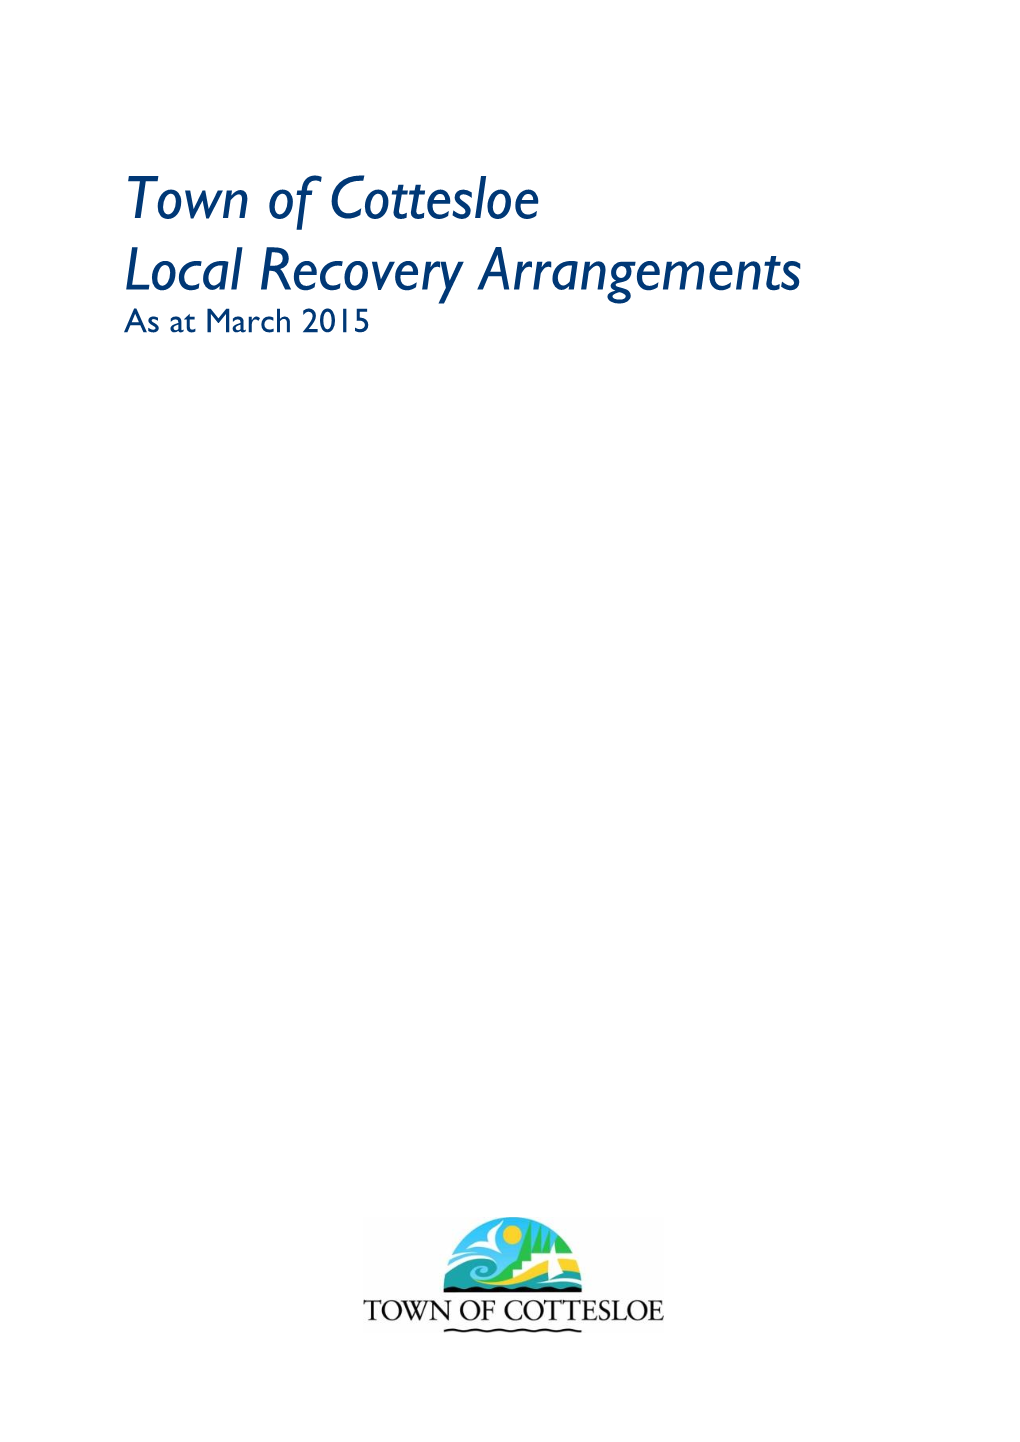 Town of Cottesloe Local Recovery Arrangements As at March 2015